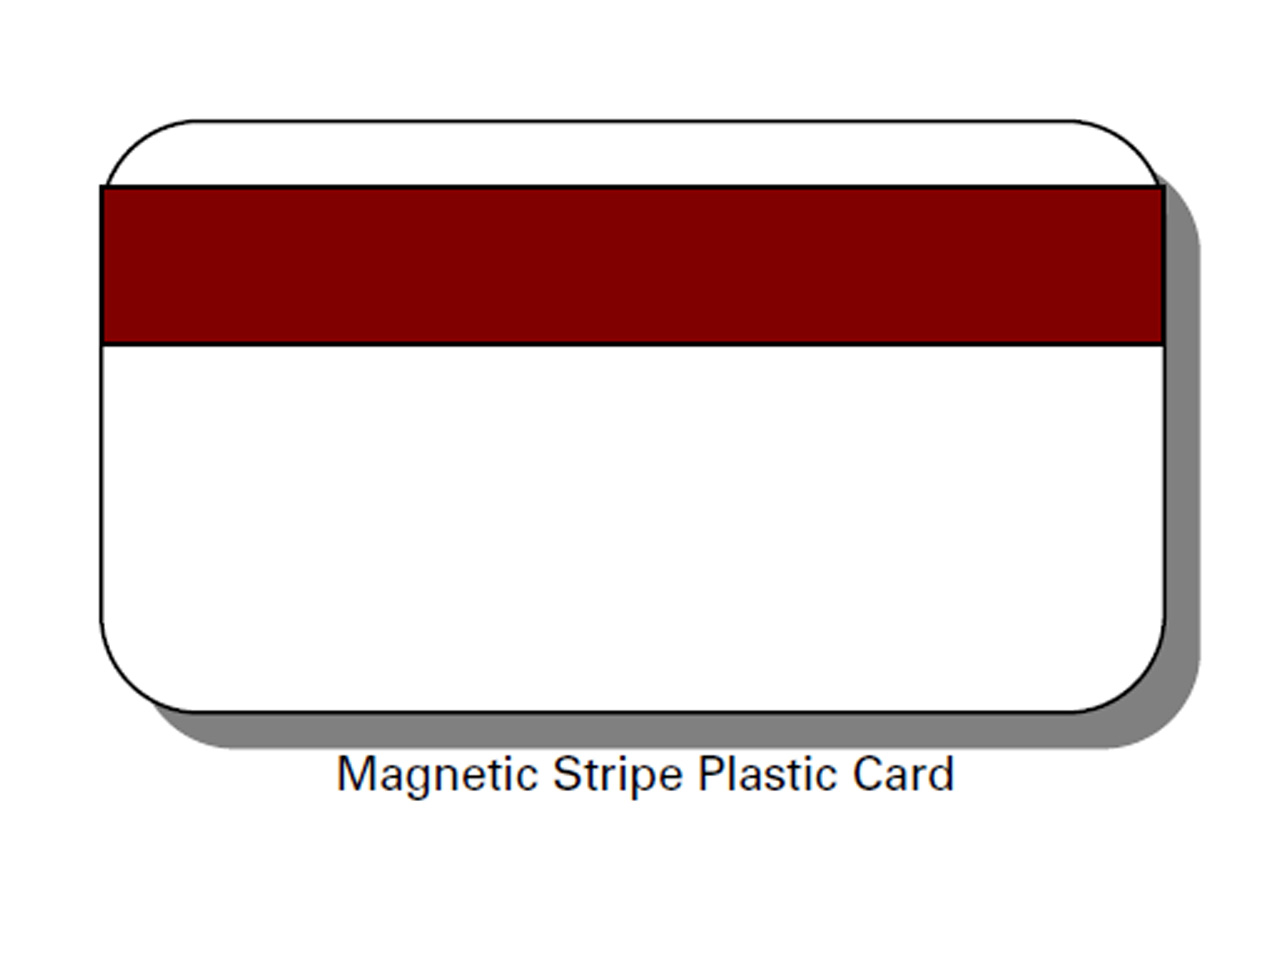 Magnetic Stripe Plastic Card with red stripe representing the magnetic stripe